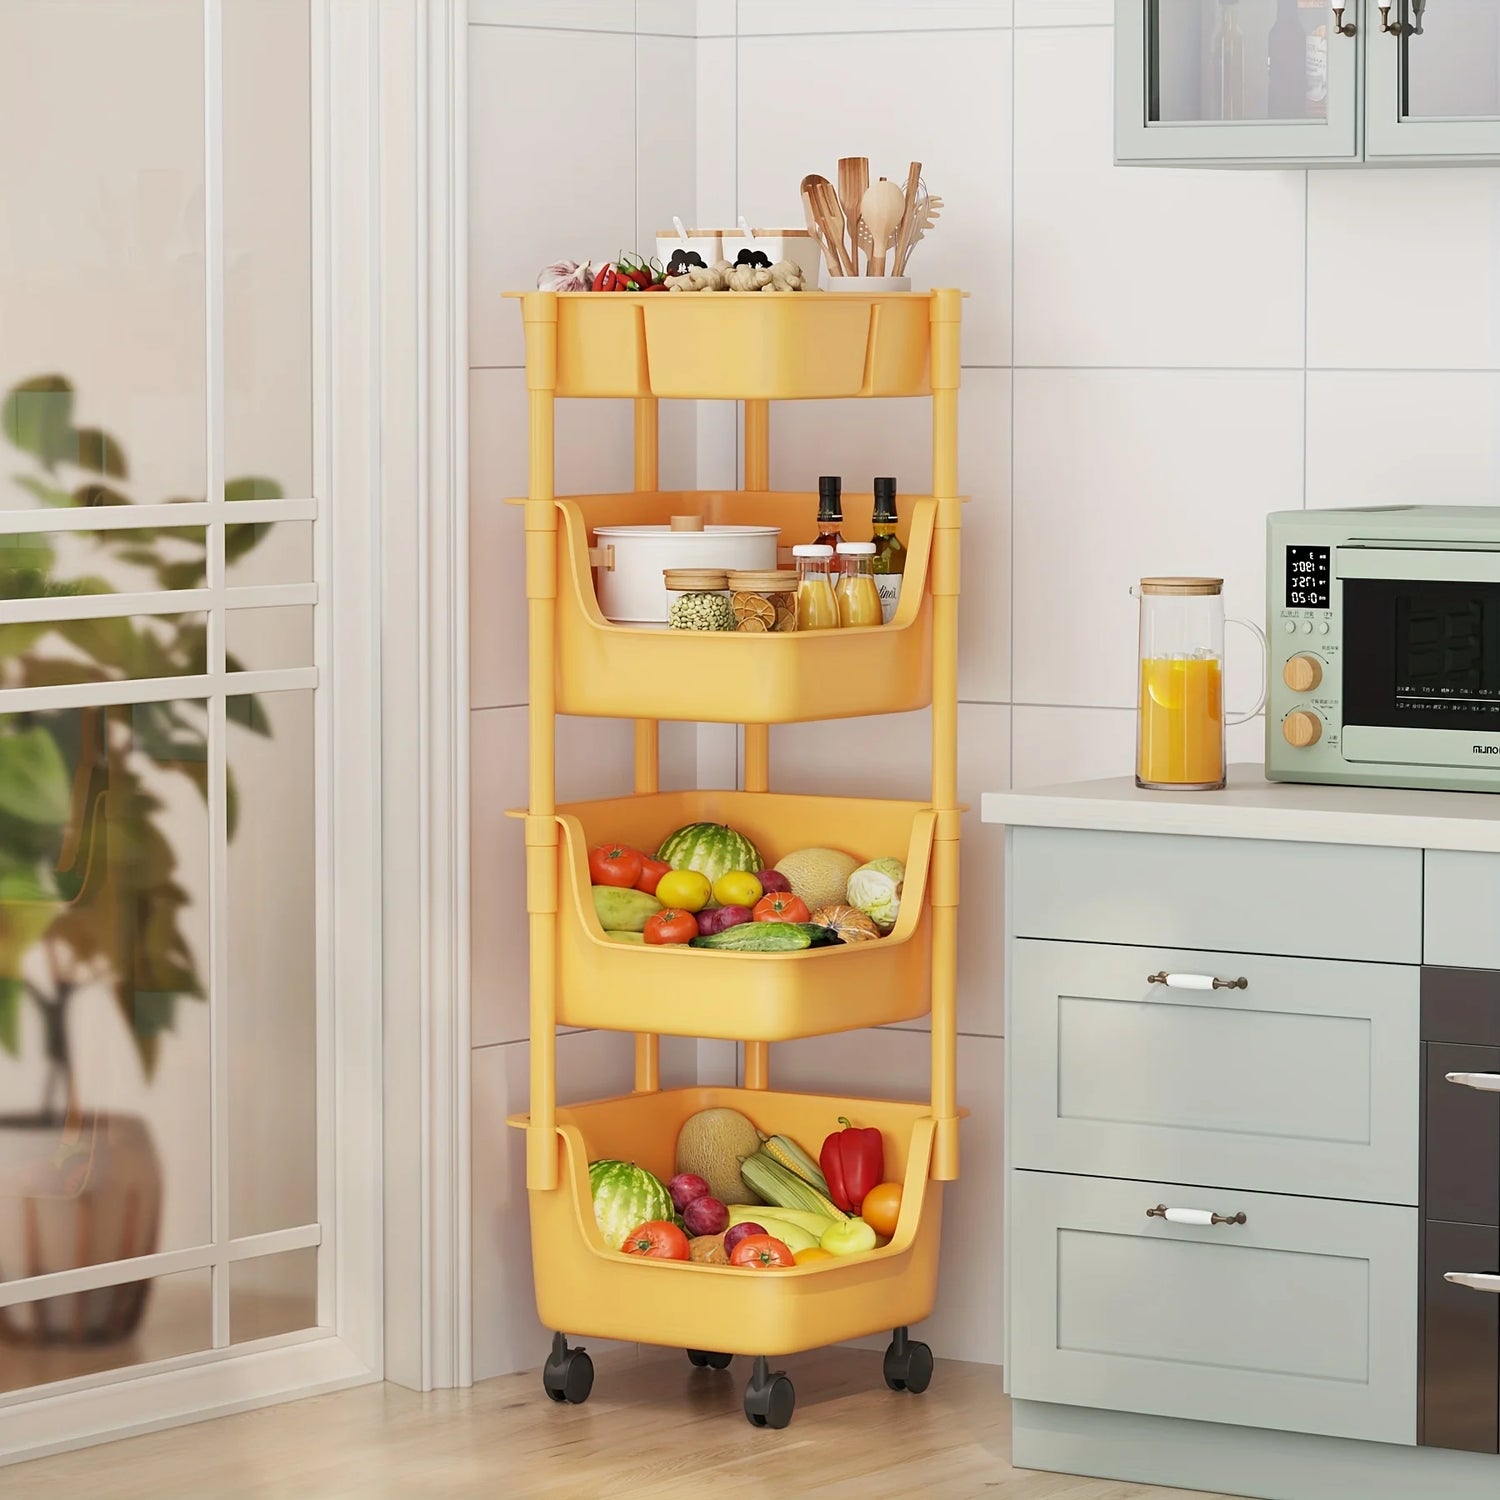 1Pc 4-Layer Condiments Storage Cart Rack, Tableware Storage Box for Fruits, Vegetable, Snacks